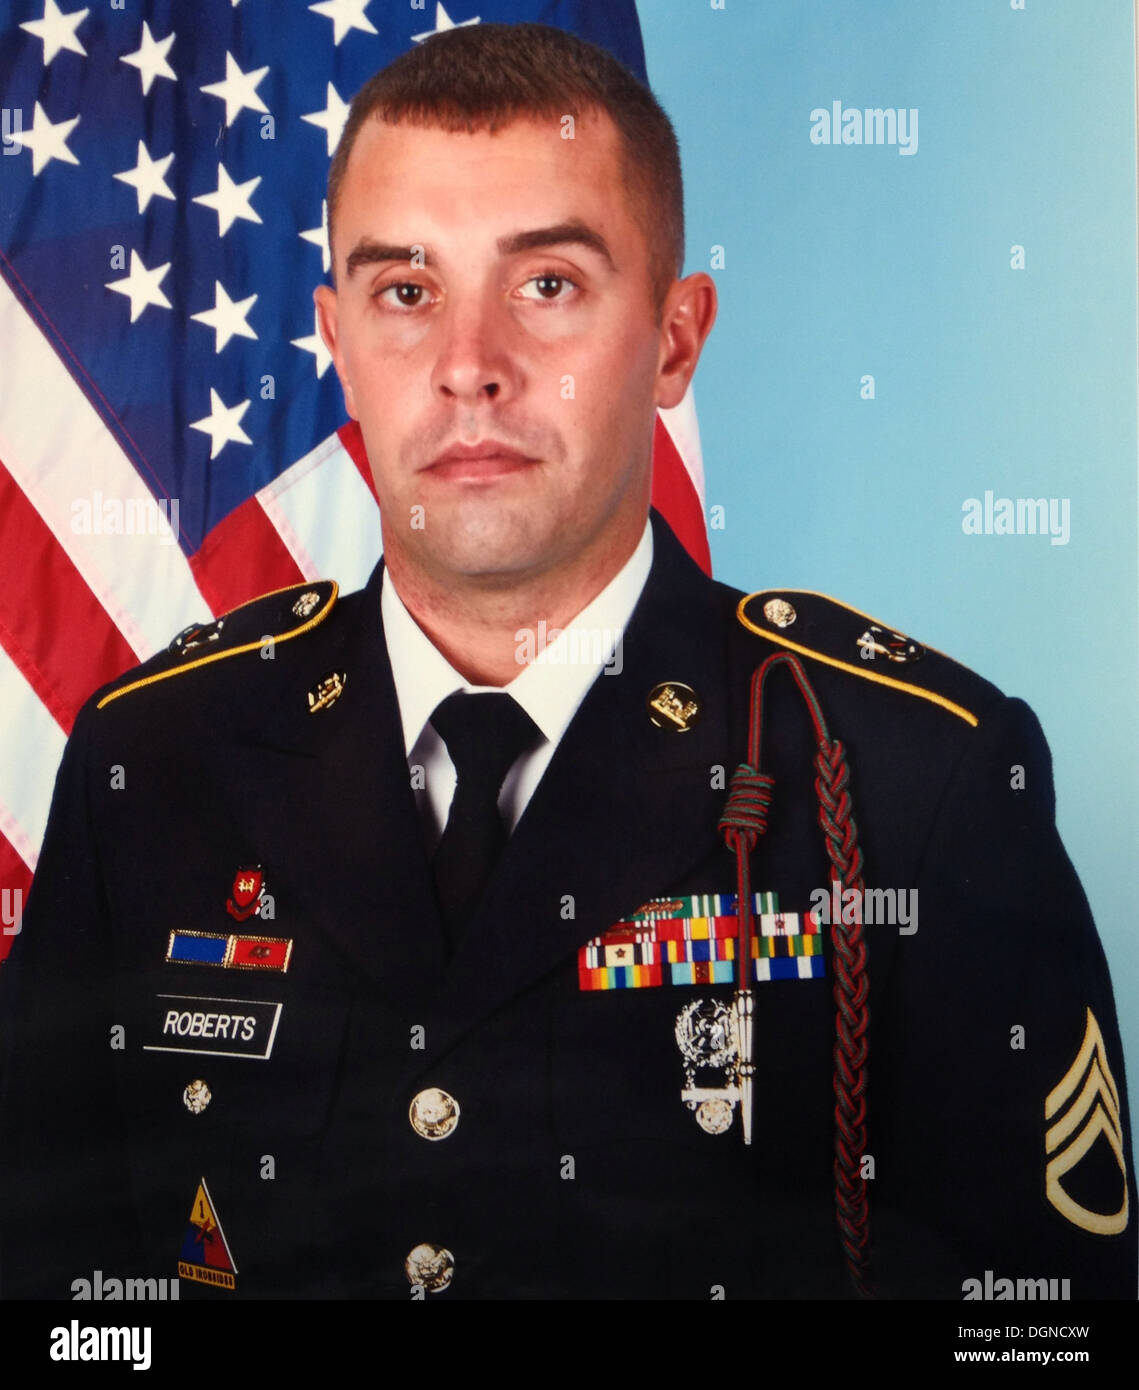 Staff Sgt. Bryan Roberts, a native of Stow, Ohio, and a squad leader within Company C, 2-3 Brigade Special Troops Battalion, 2nd Armored Brigade Combat Team 'Spartans', 3rd Infantry Division. Roberts just won the 3rd ID NCO of the Quarter Board here, Oct. Stock Photo